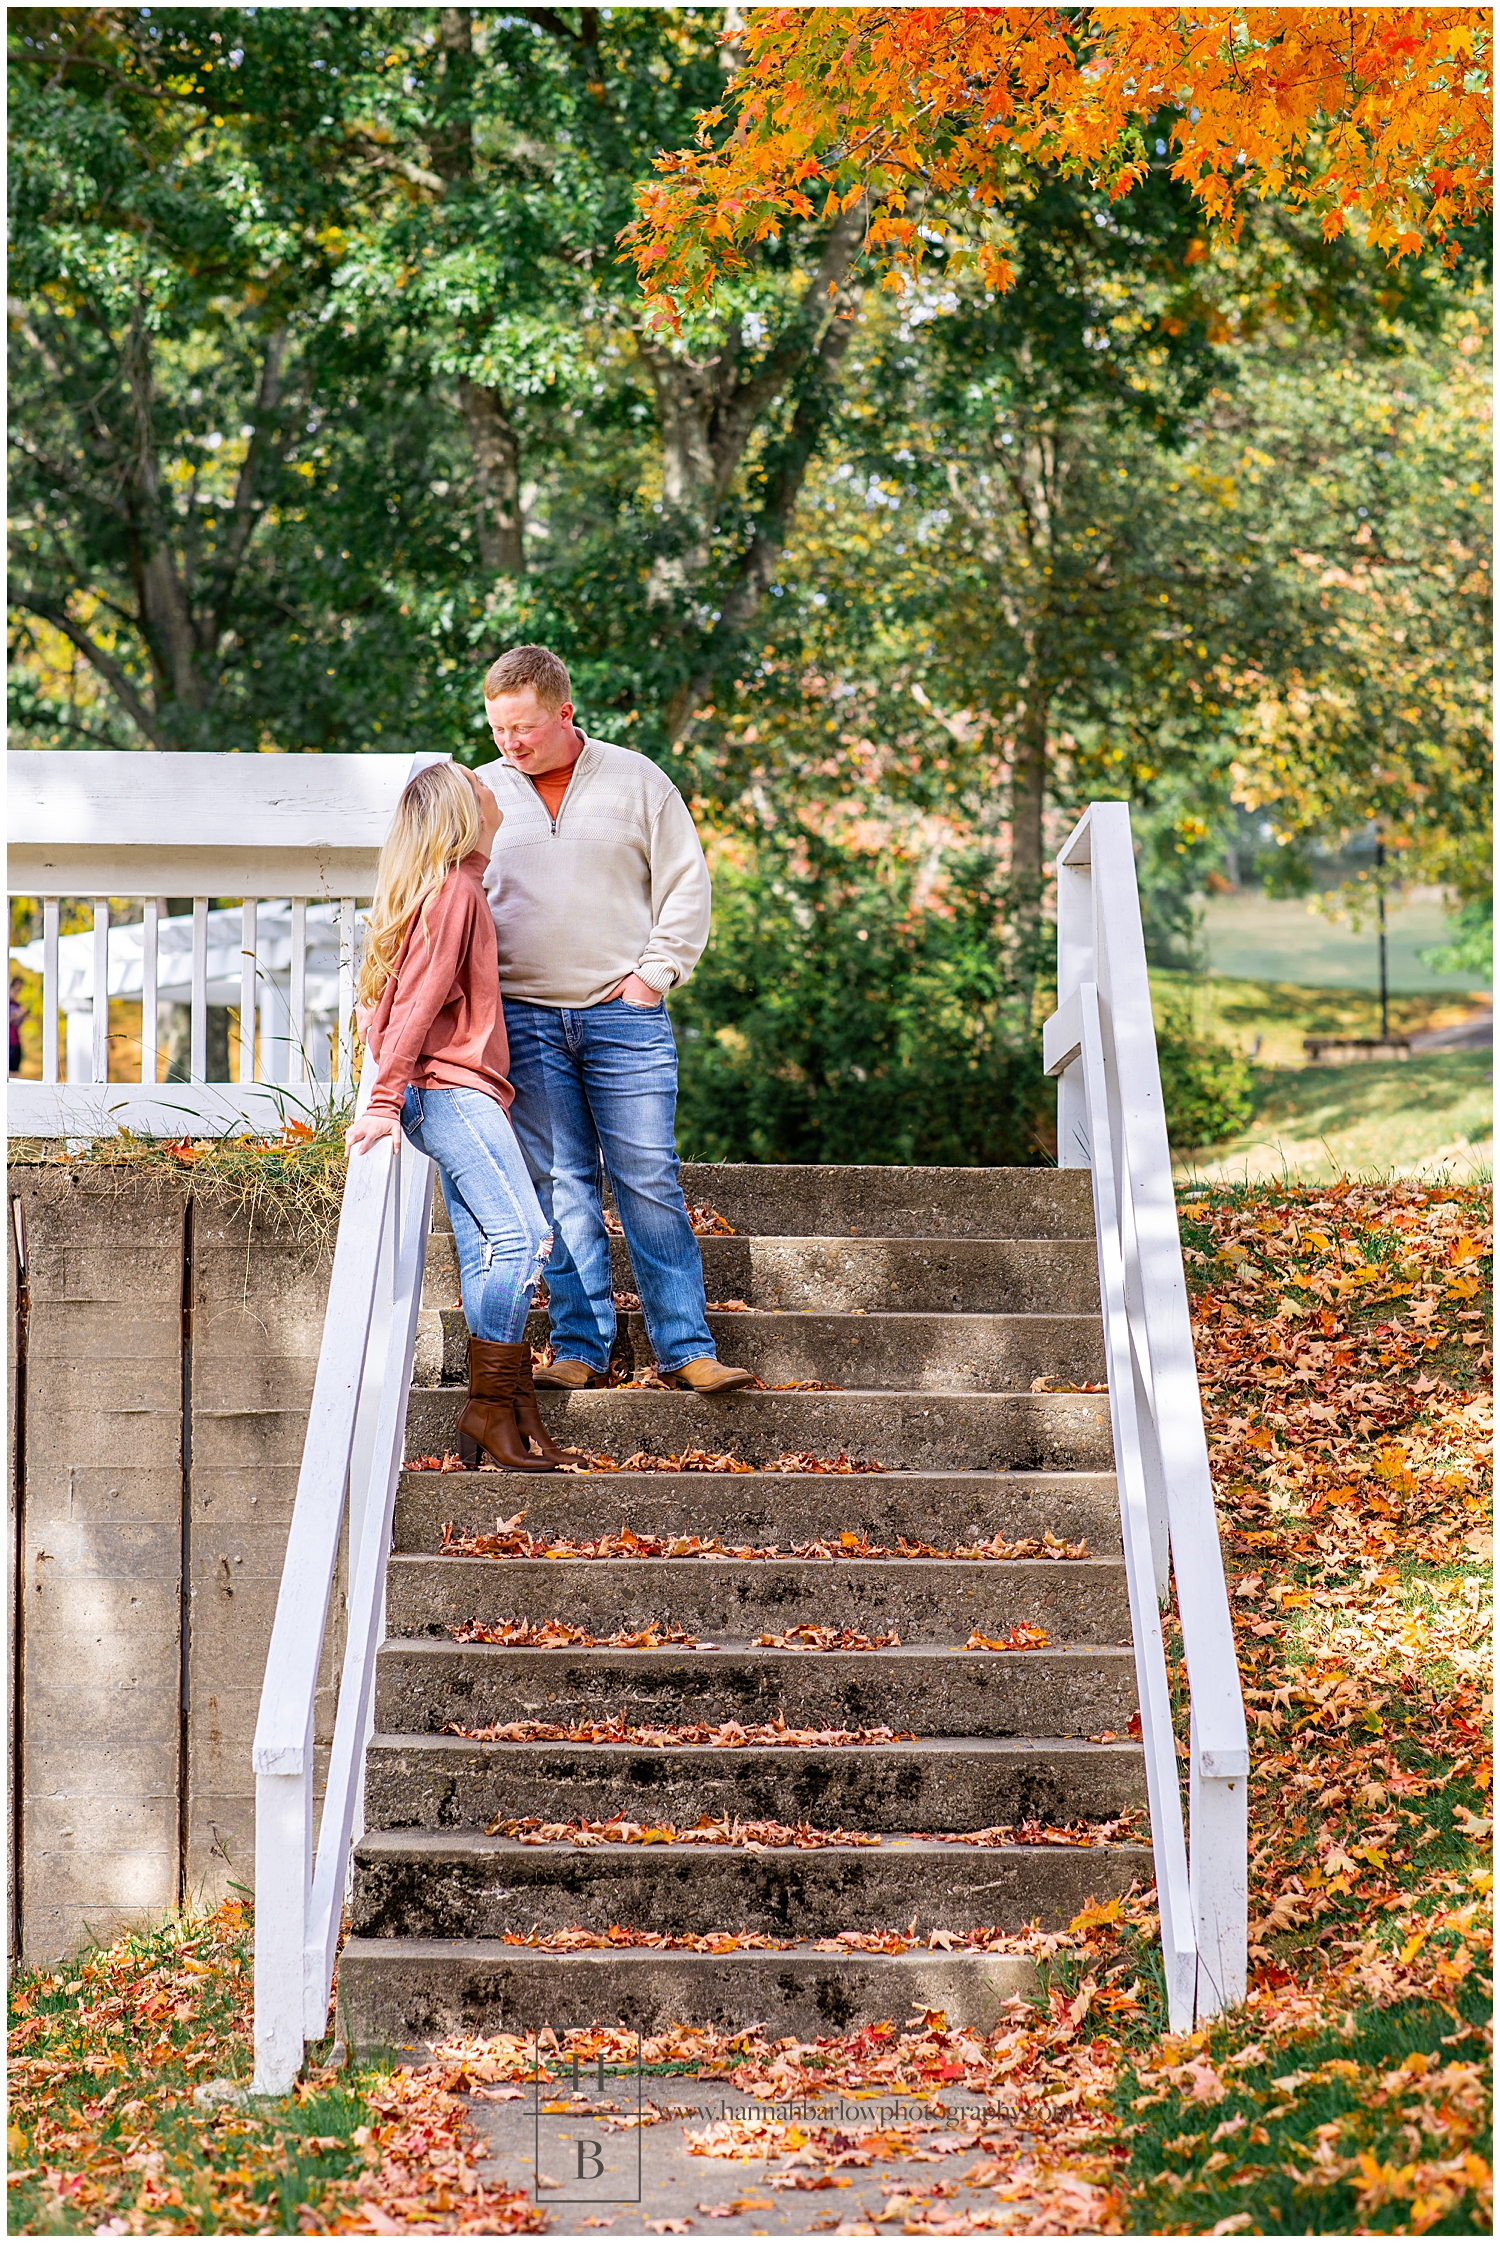 Couple embraces and looks at one another on stone stairs with fall leaves in background.